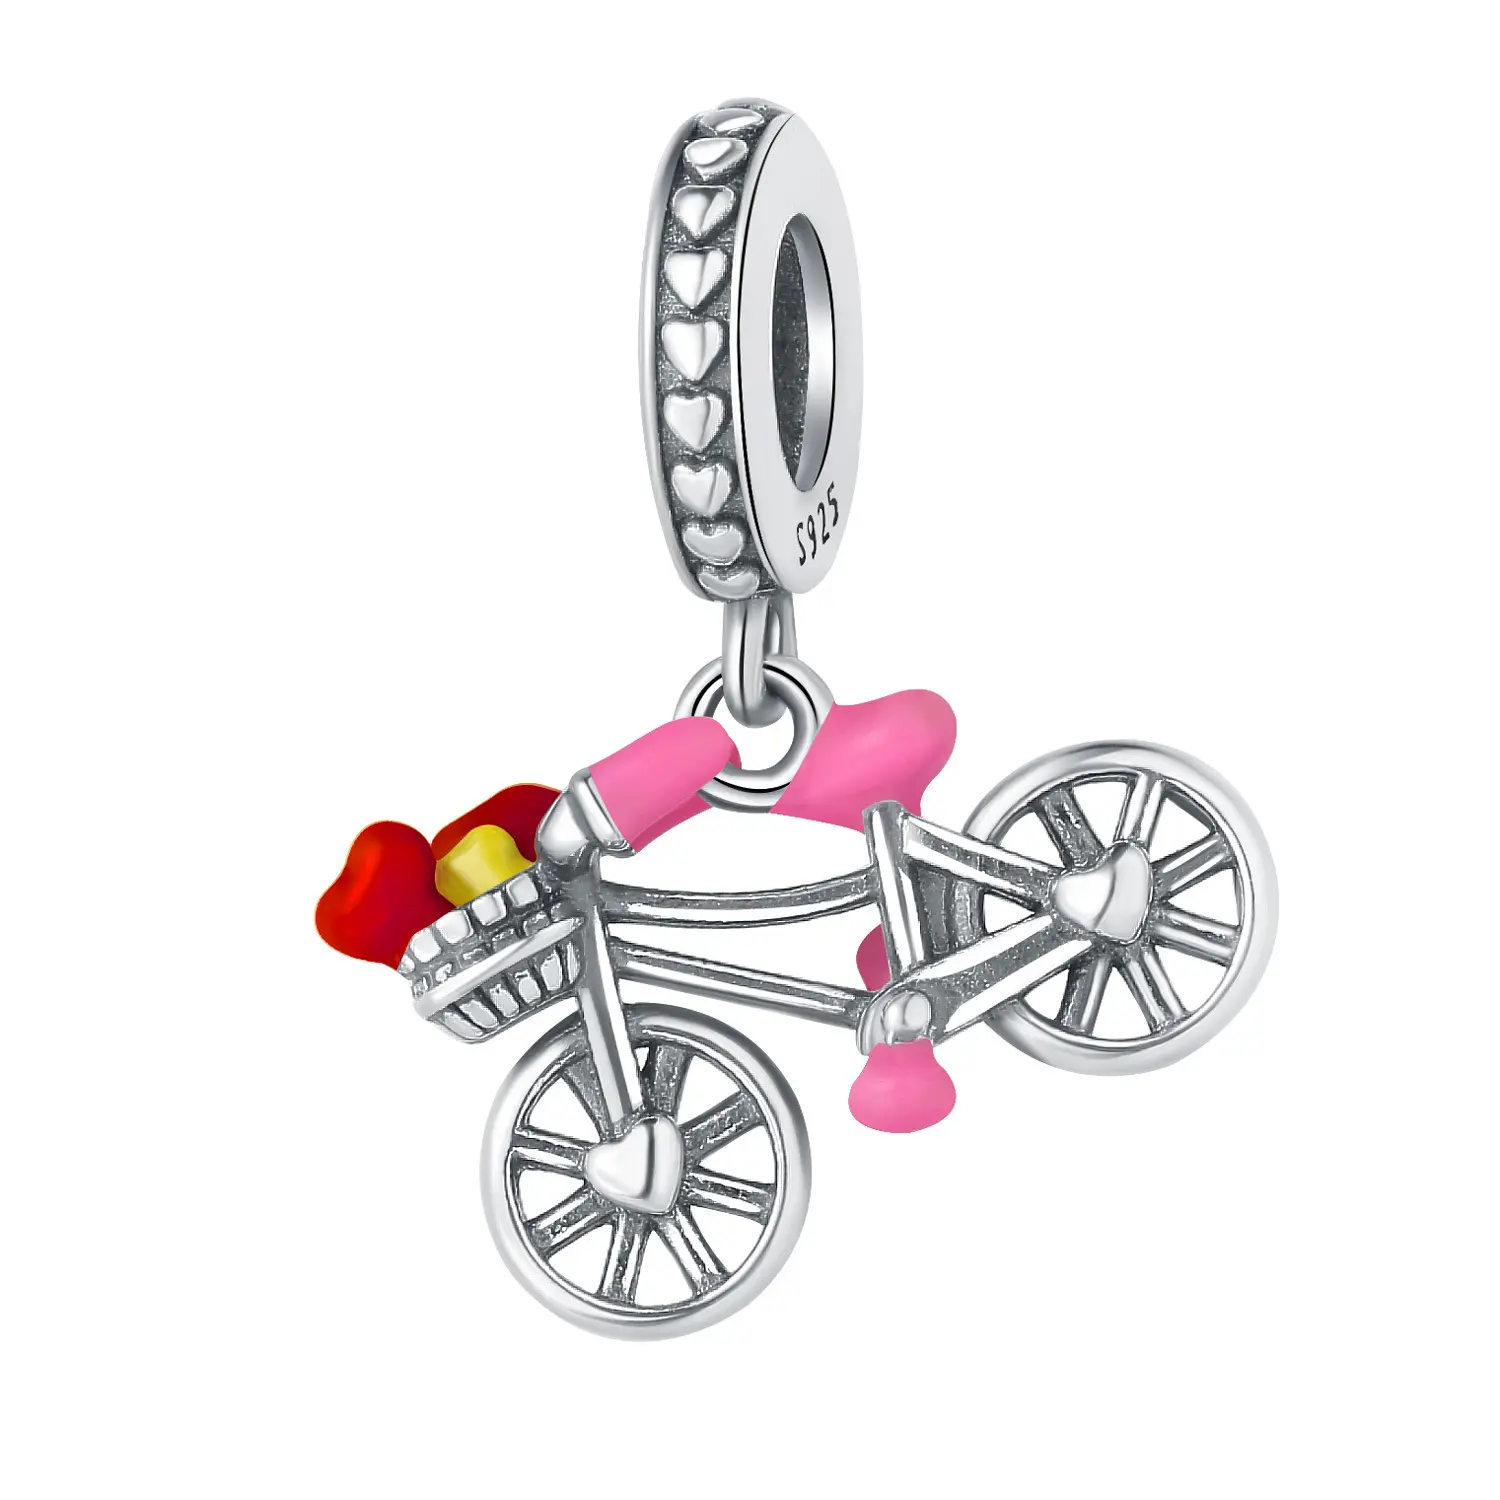 Fashion vehicle charm S925 silver pink enamel love heart bicycle pendant for bracelet necklace making jewelry accessories